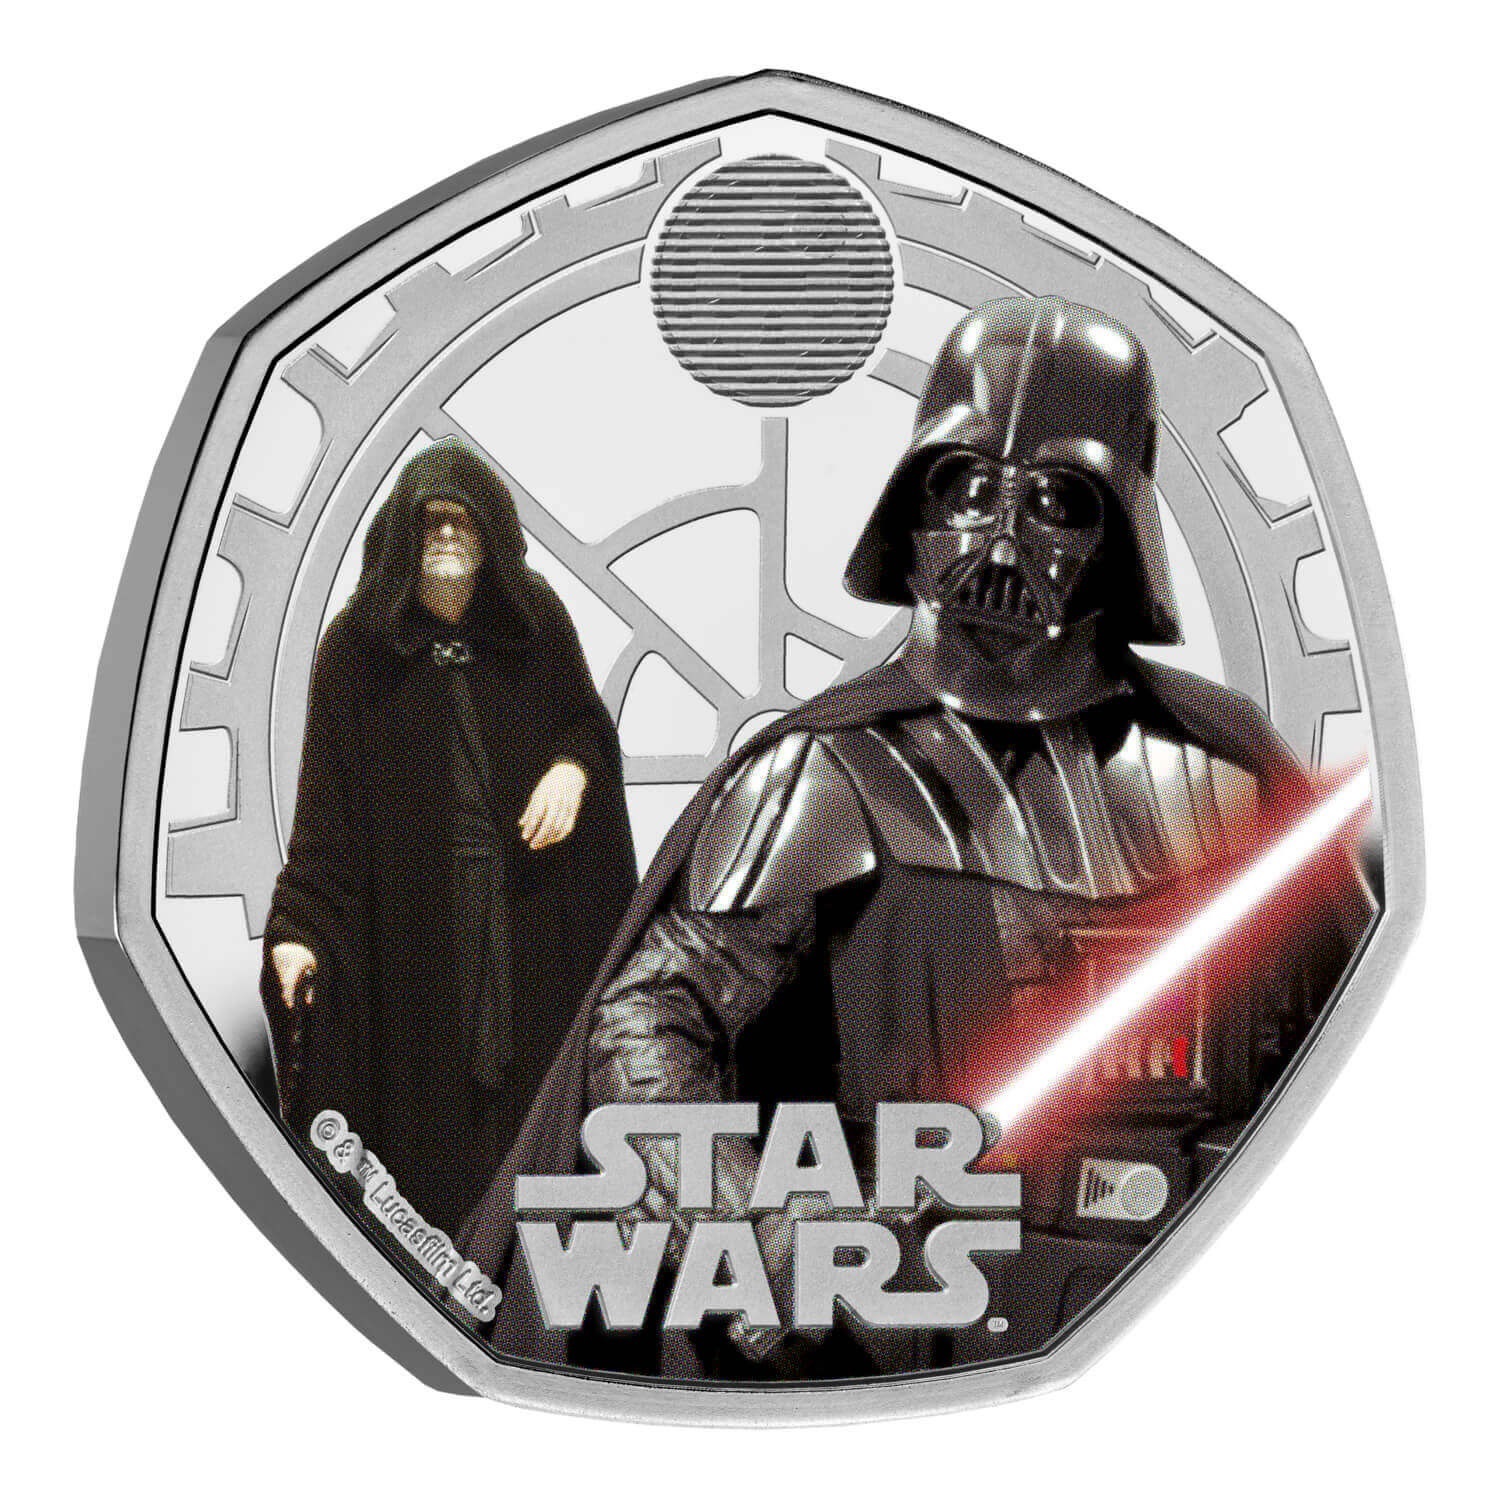 (W185.50.P.2023.UK23DVSC) United Kingdom 50 Pence Star Wars (Darth Vader and Emperor Palpatine) 2023 - Proof silver Reverse (zoom)